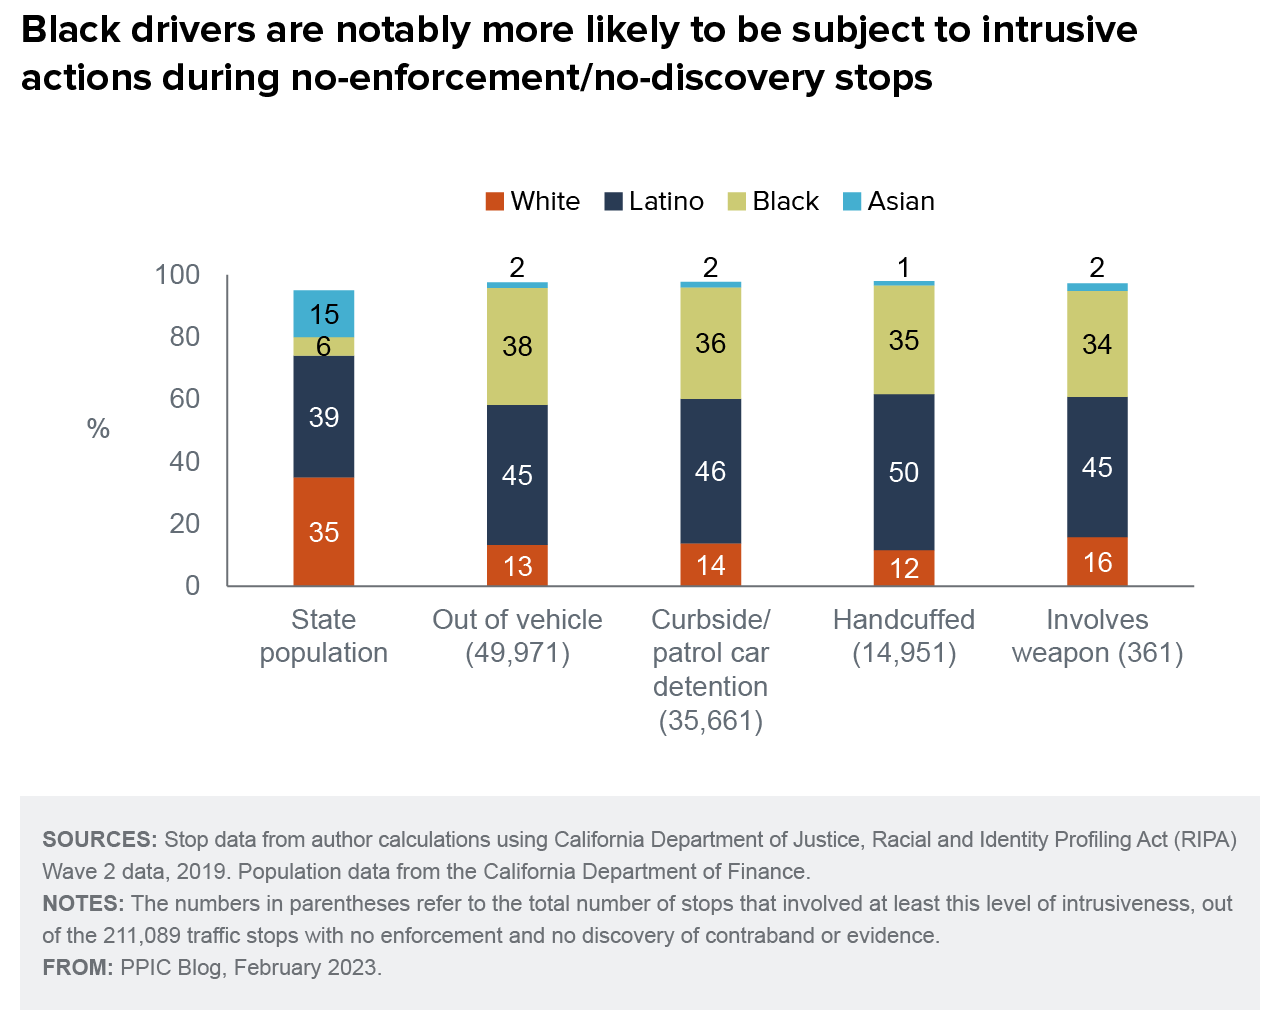 figure - Black drivers are notably more likely to be subject to intrusive actions during no-enforcement/no-discovery stops